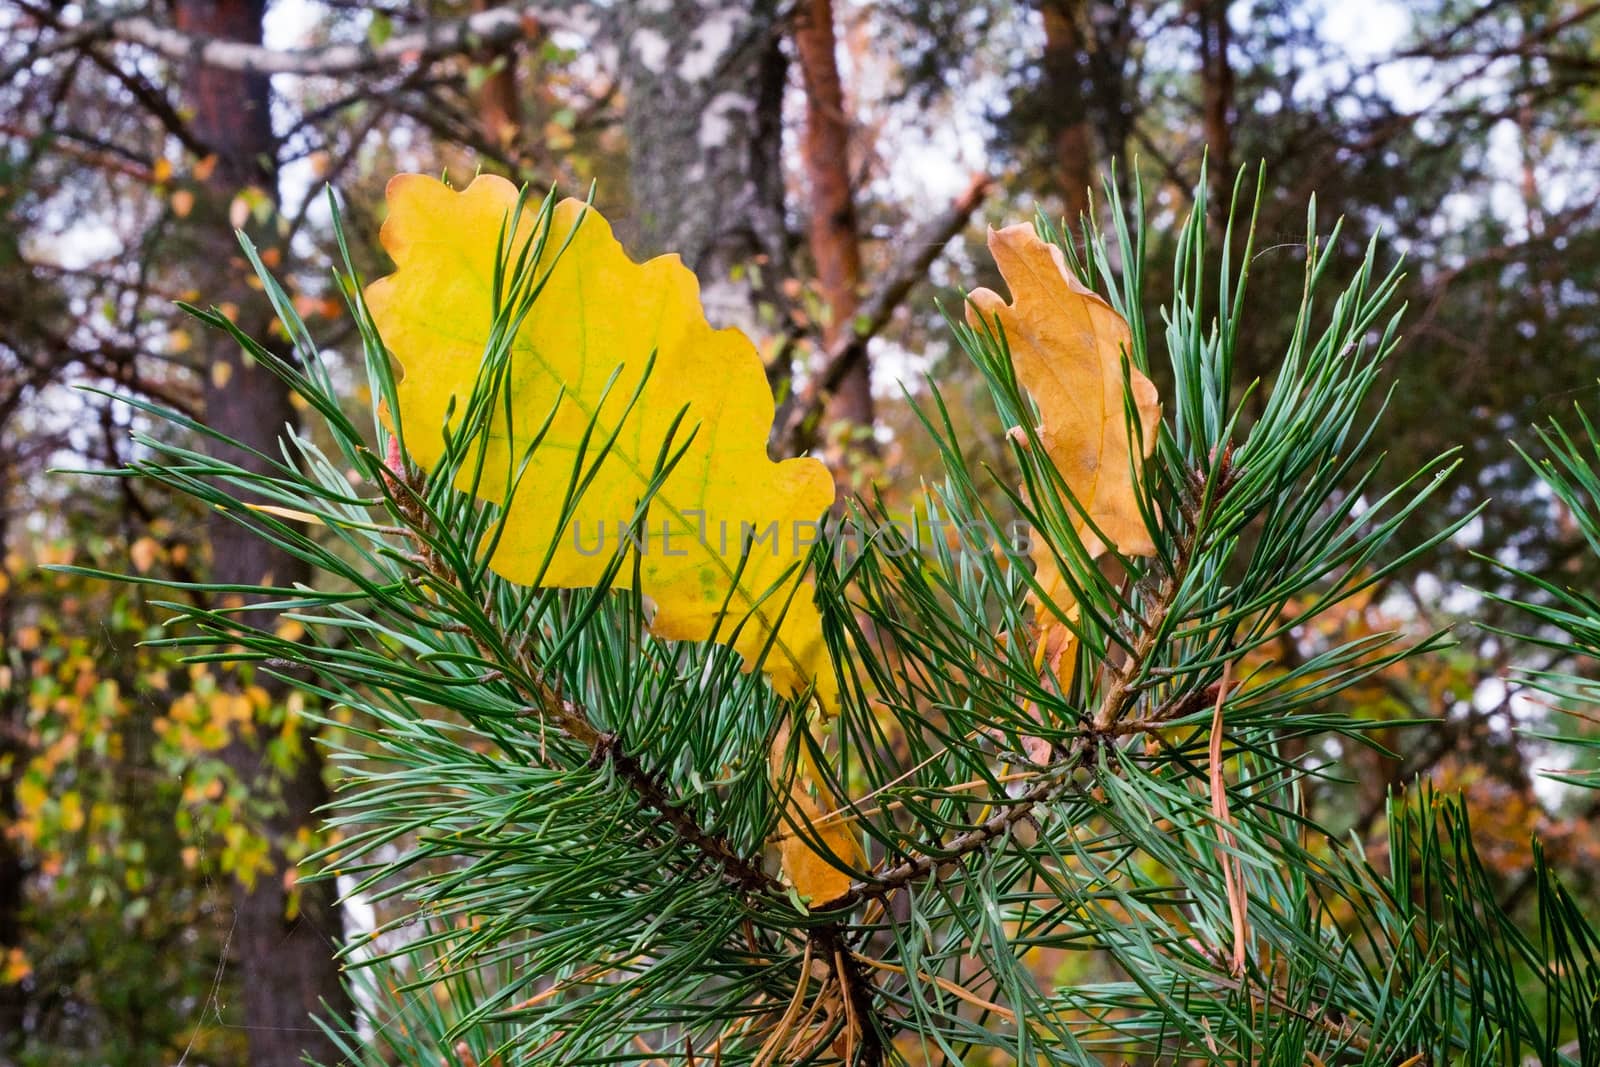 On a pine branch between needles there are fallen-down yellow leaves of an oak.